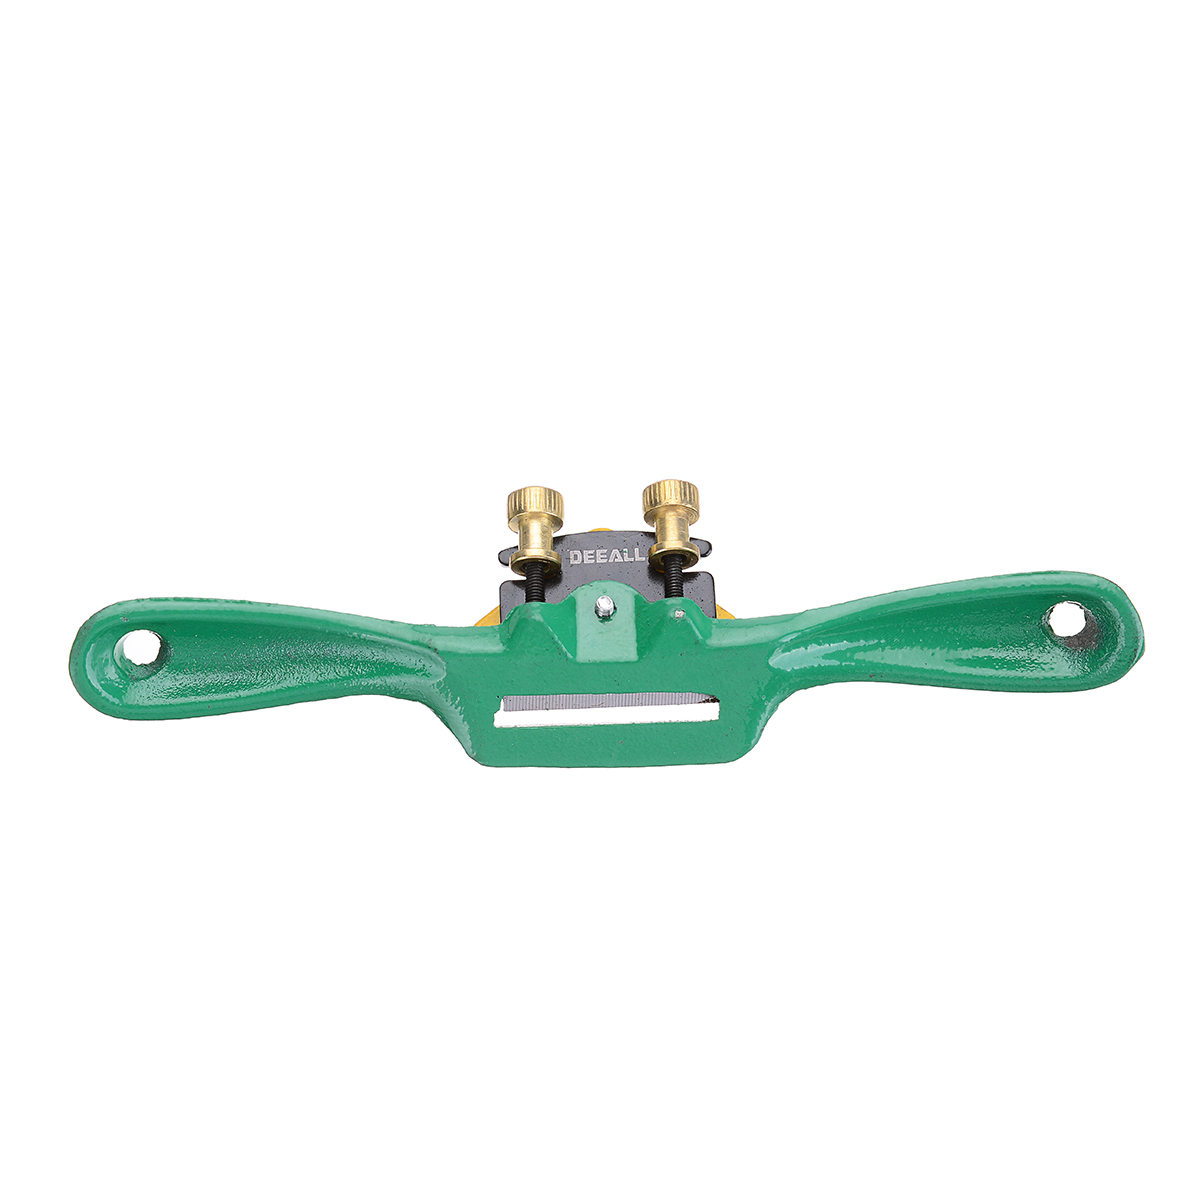 Mayitr Iron Spoke Shave Plane 44mm Metal Cutting Edge Wood Shaping For Woodworker Woodworking Machinery